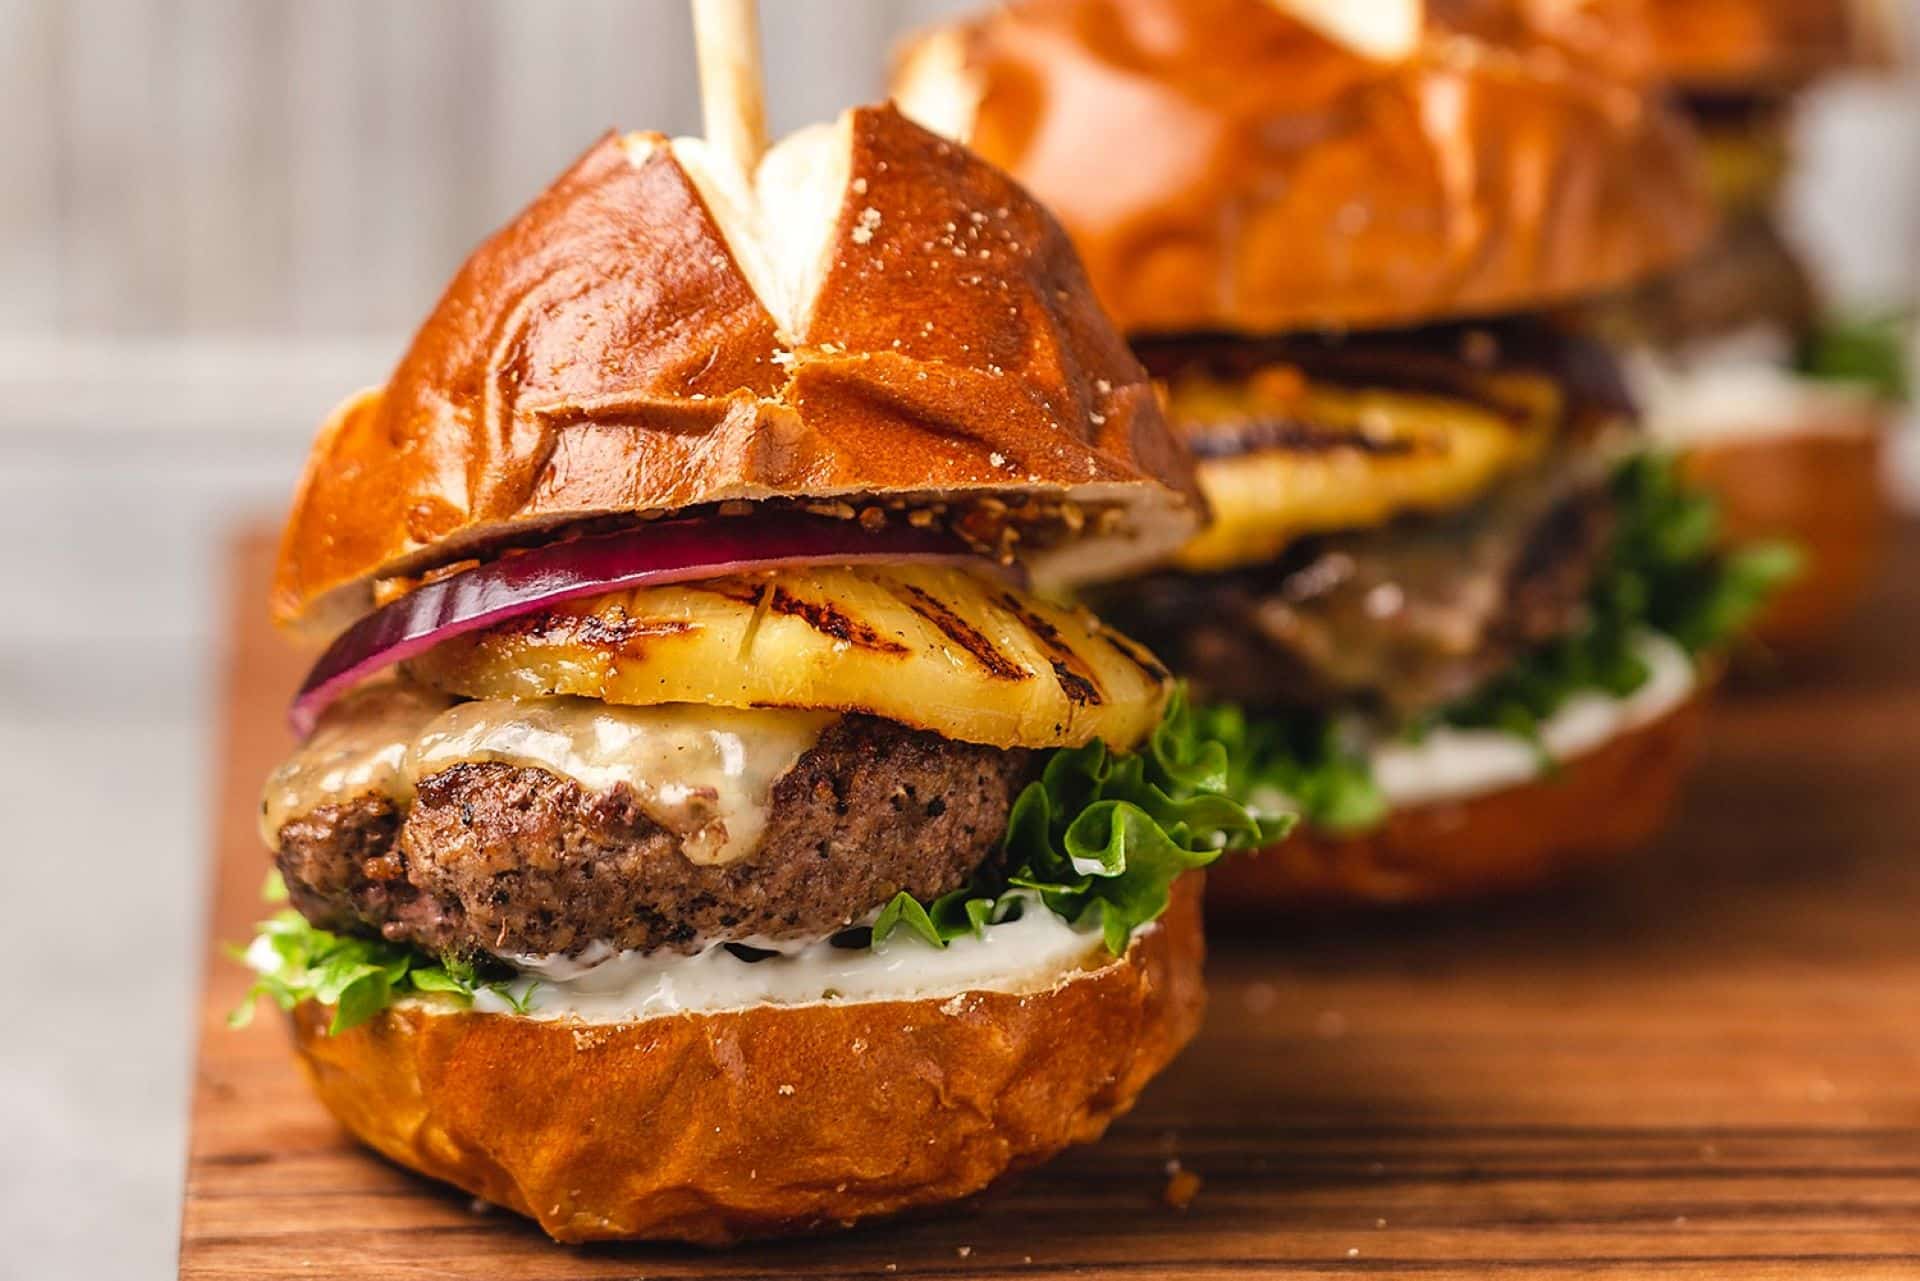 8 Burgers and Sliders We’re Smashing All Summer